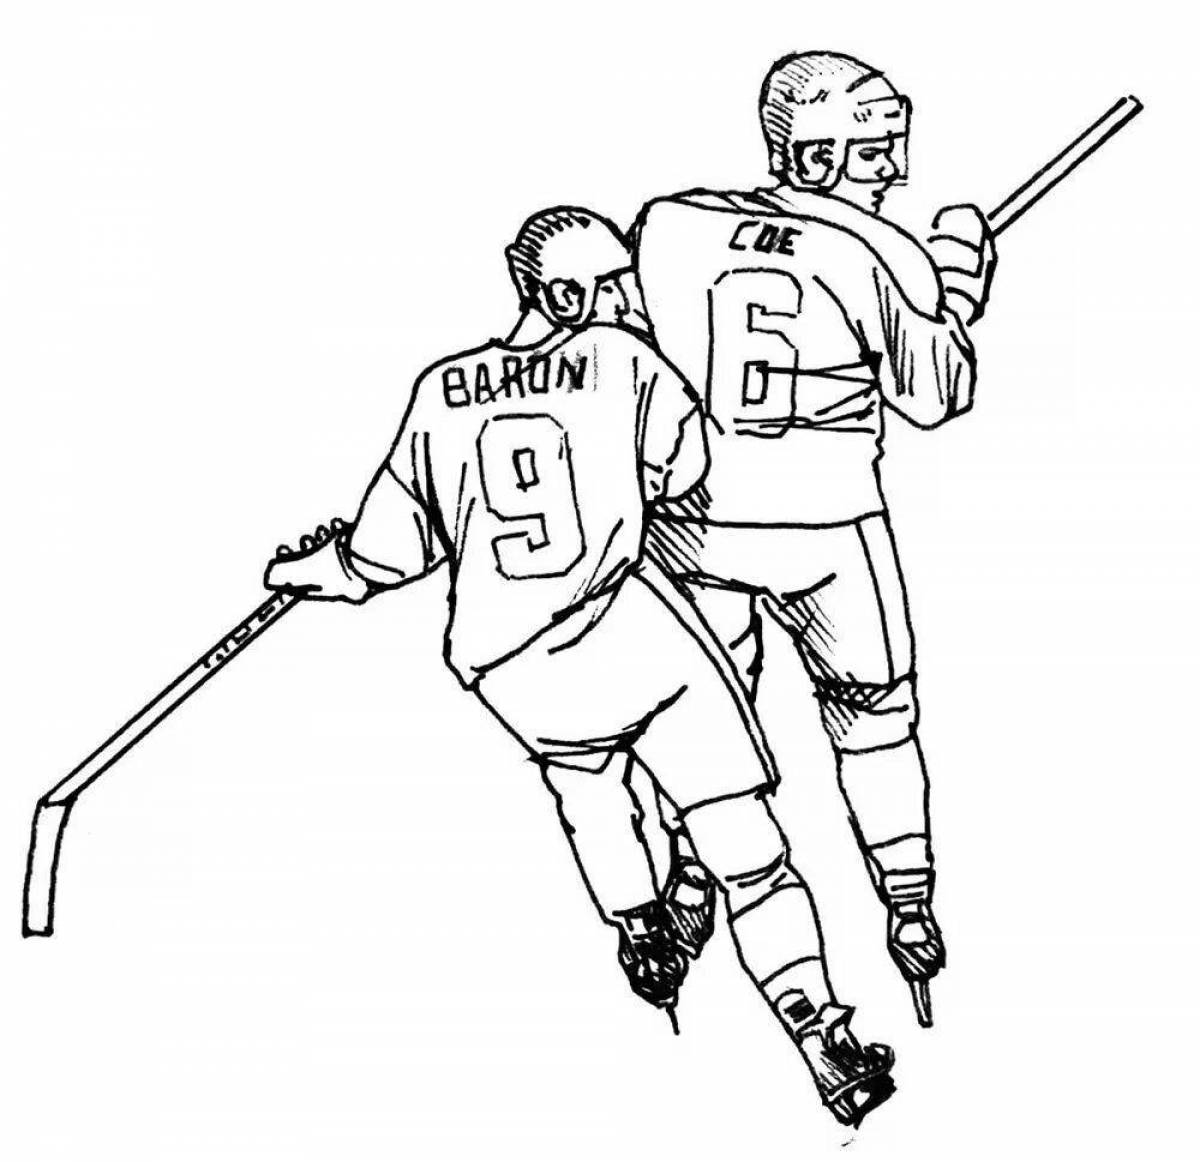 Colorful hockey coloring book